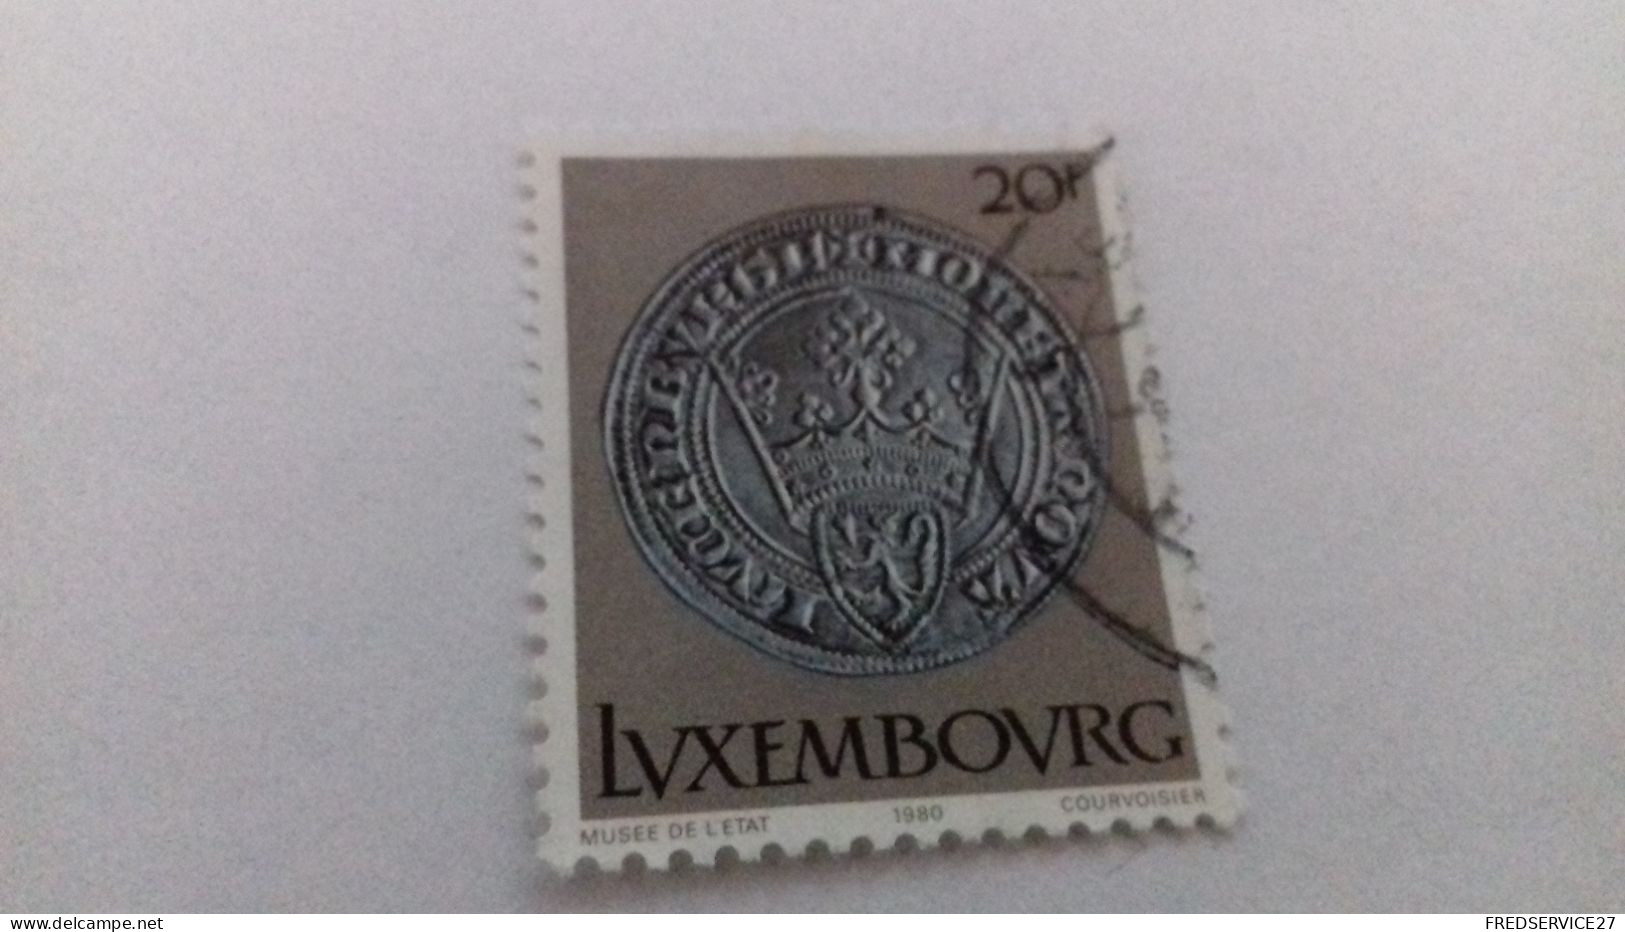 LUXEMBOURG MUSEE DE L ETAT 1980 - Used Stamps